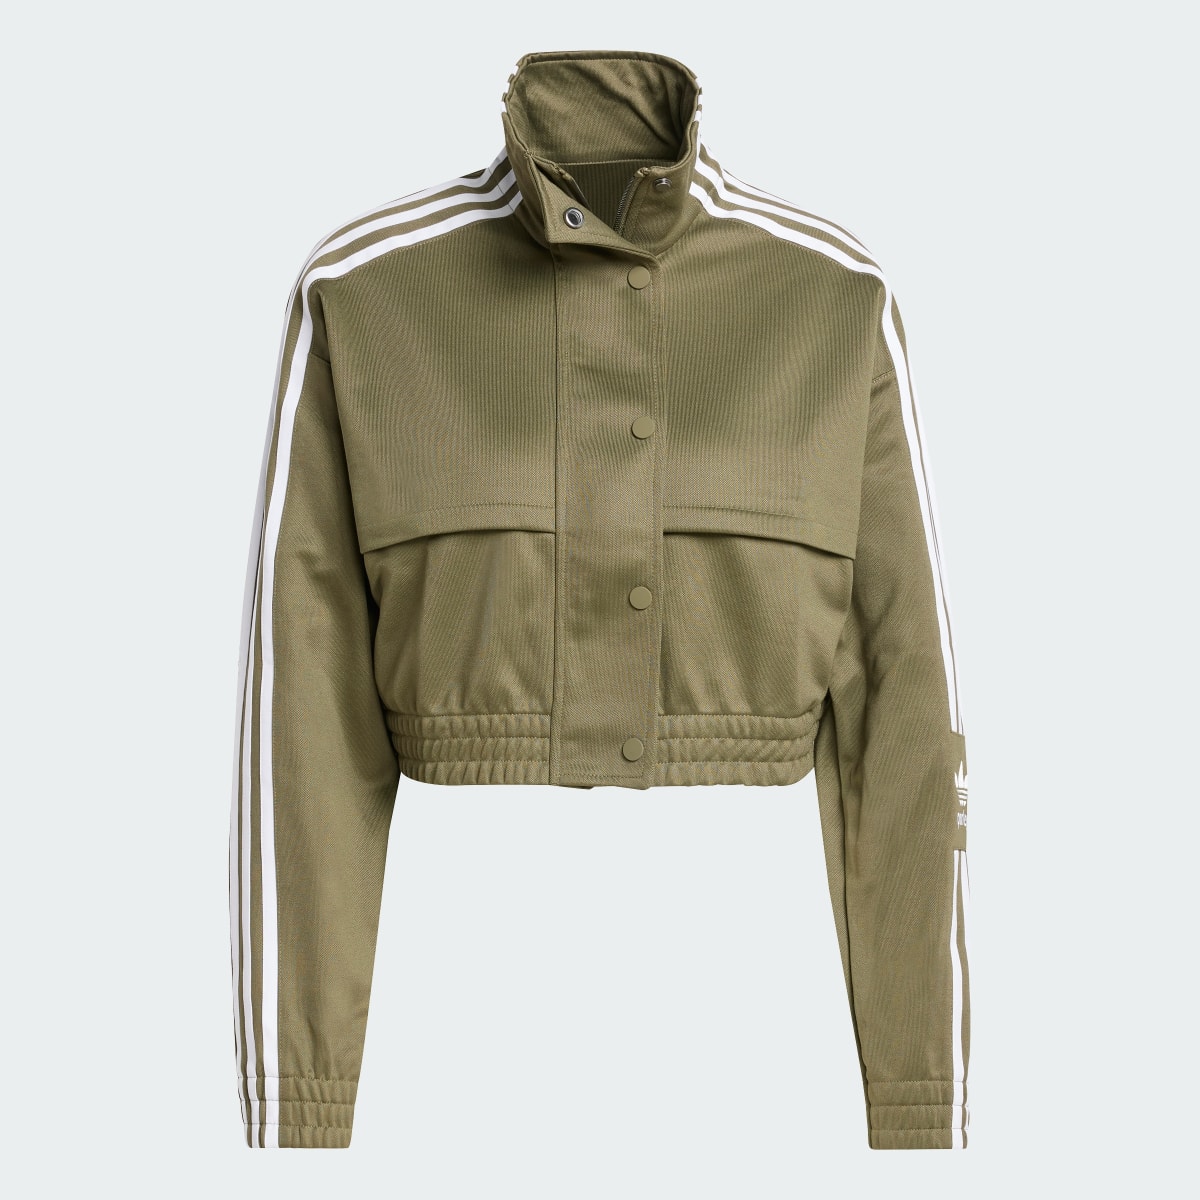 Adidas Track top Parley. 5